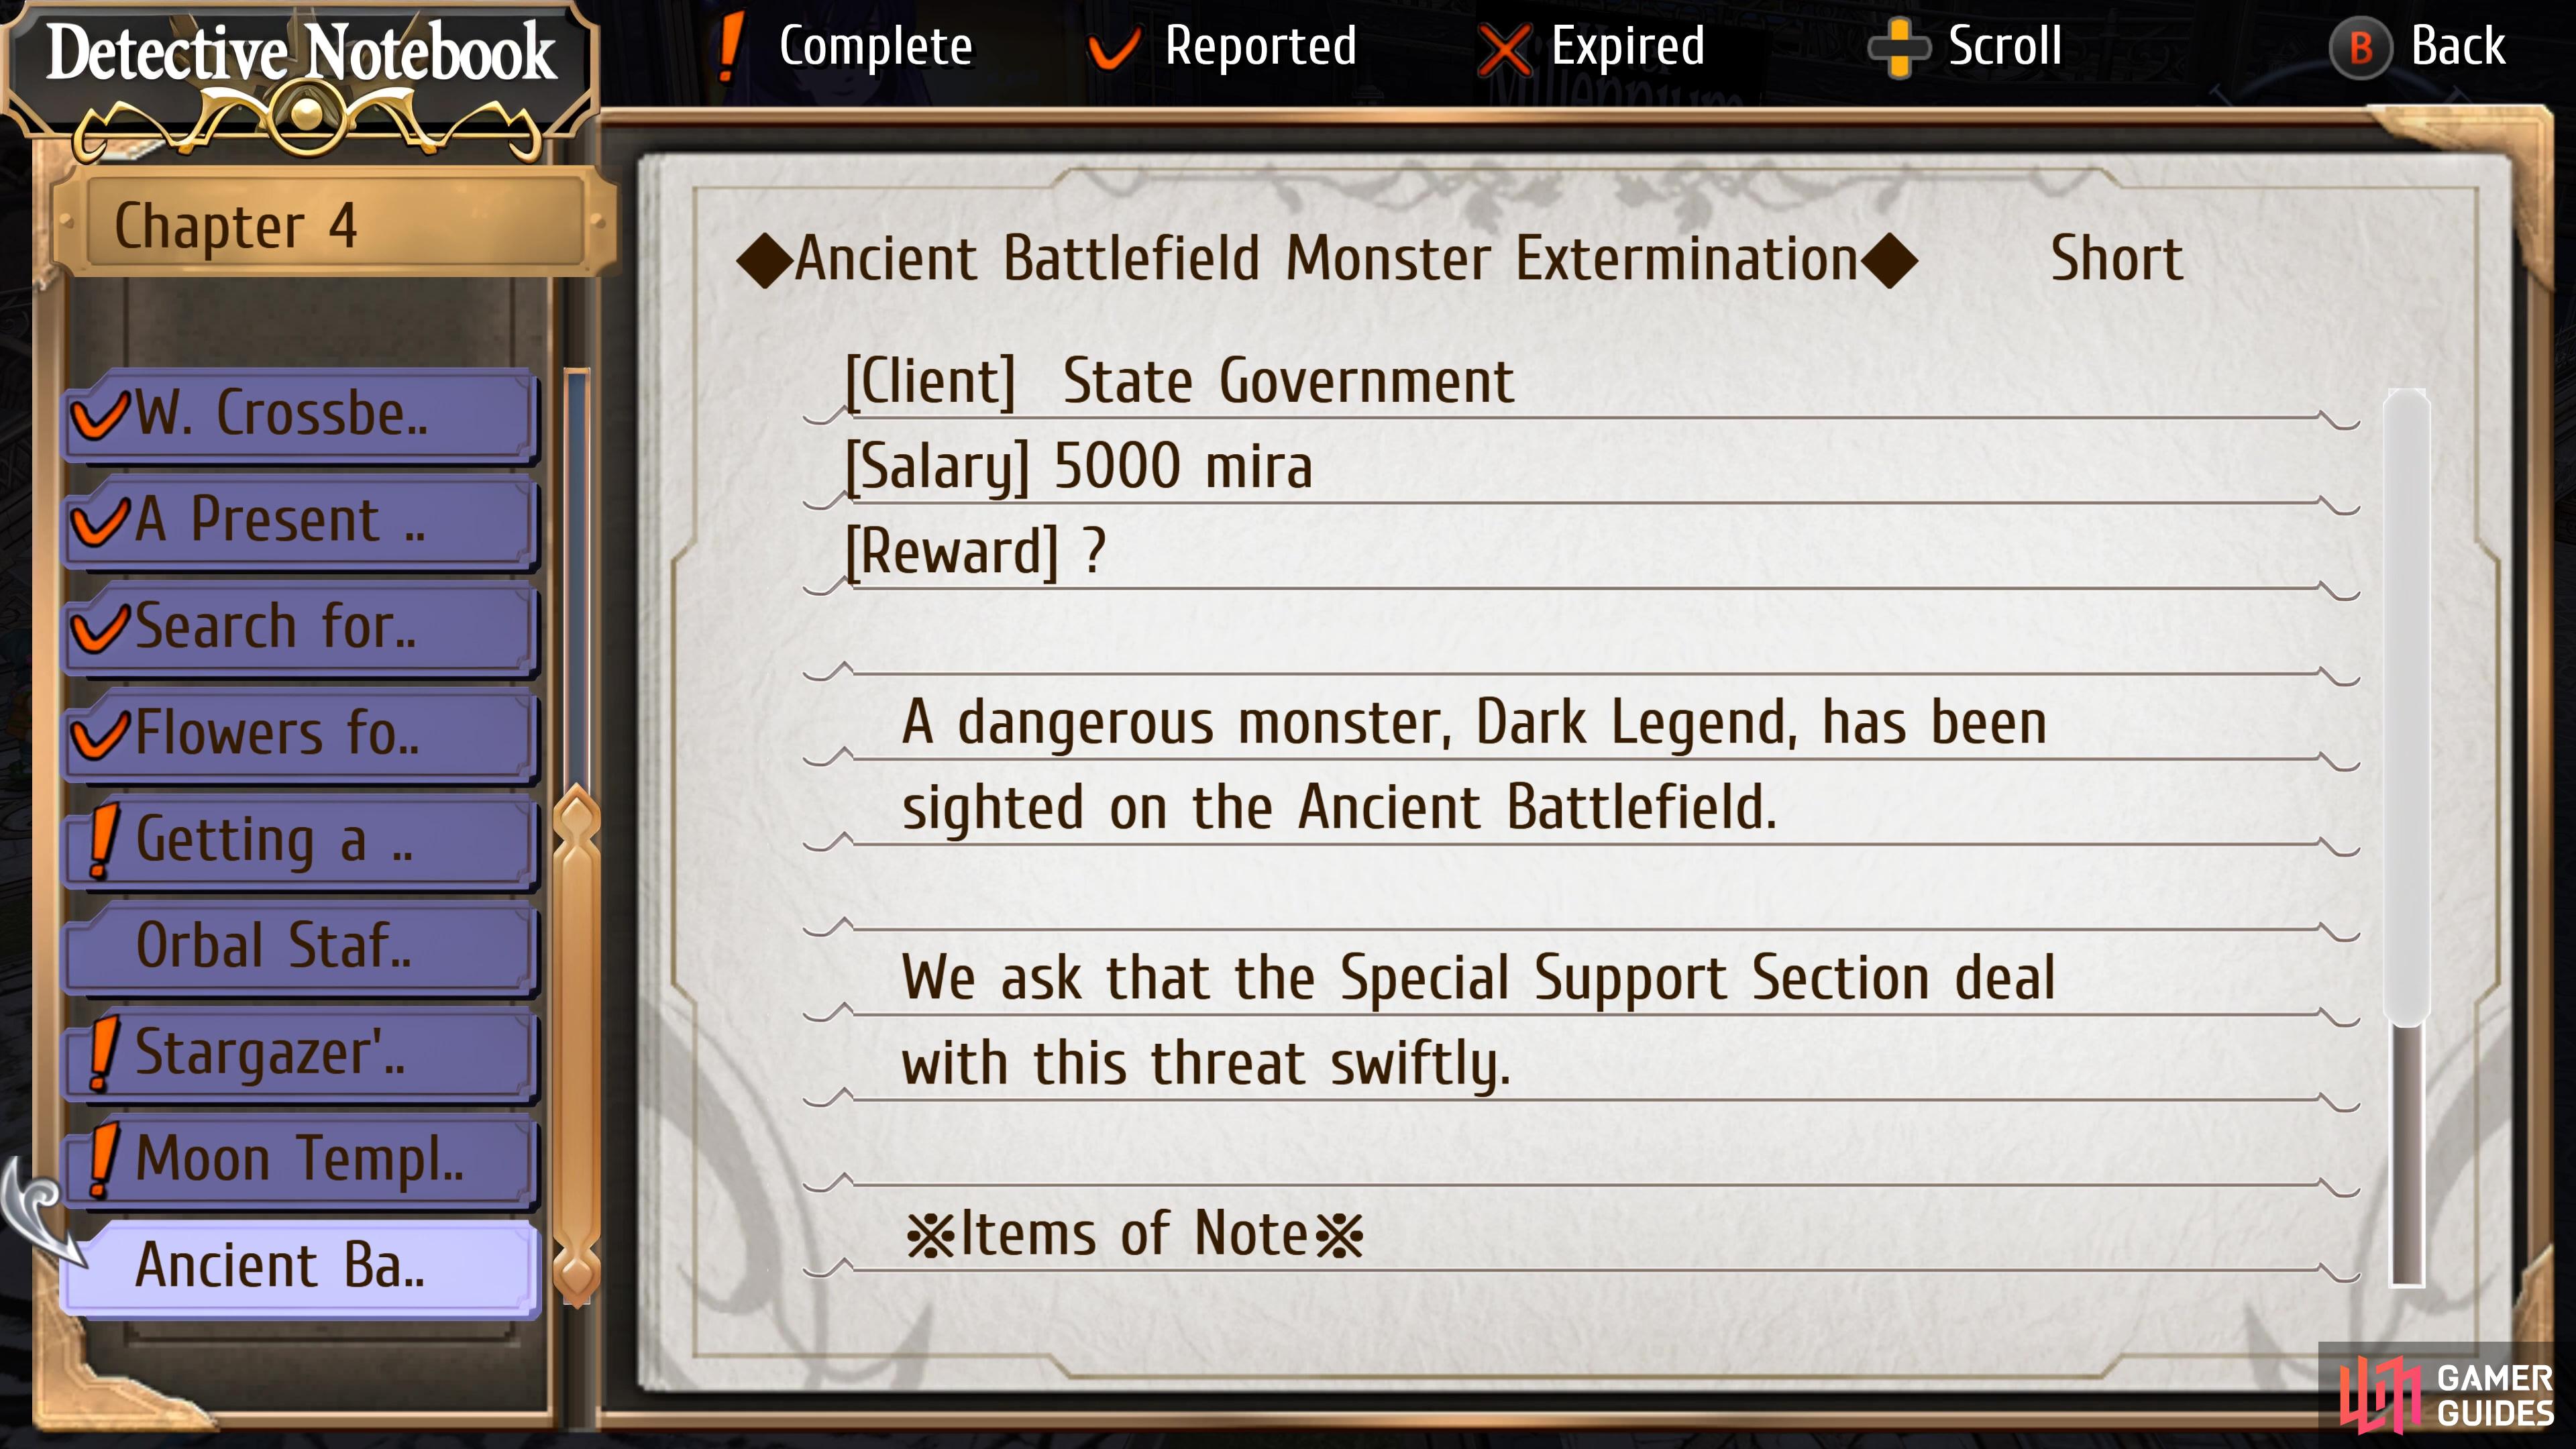 Ancient Battlefield Monster Extermination is a request on Chapter 4 Day 3.